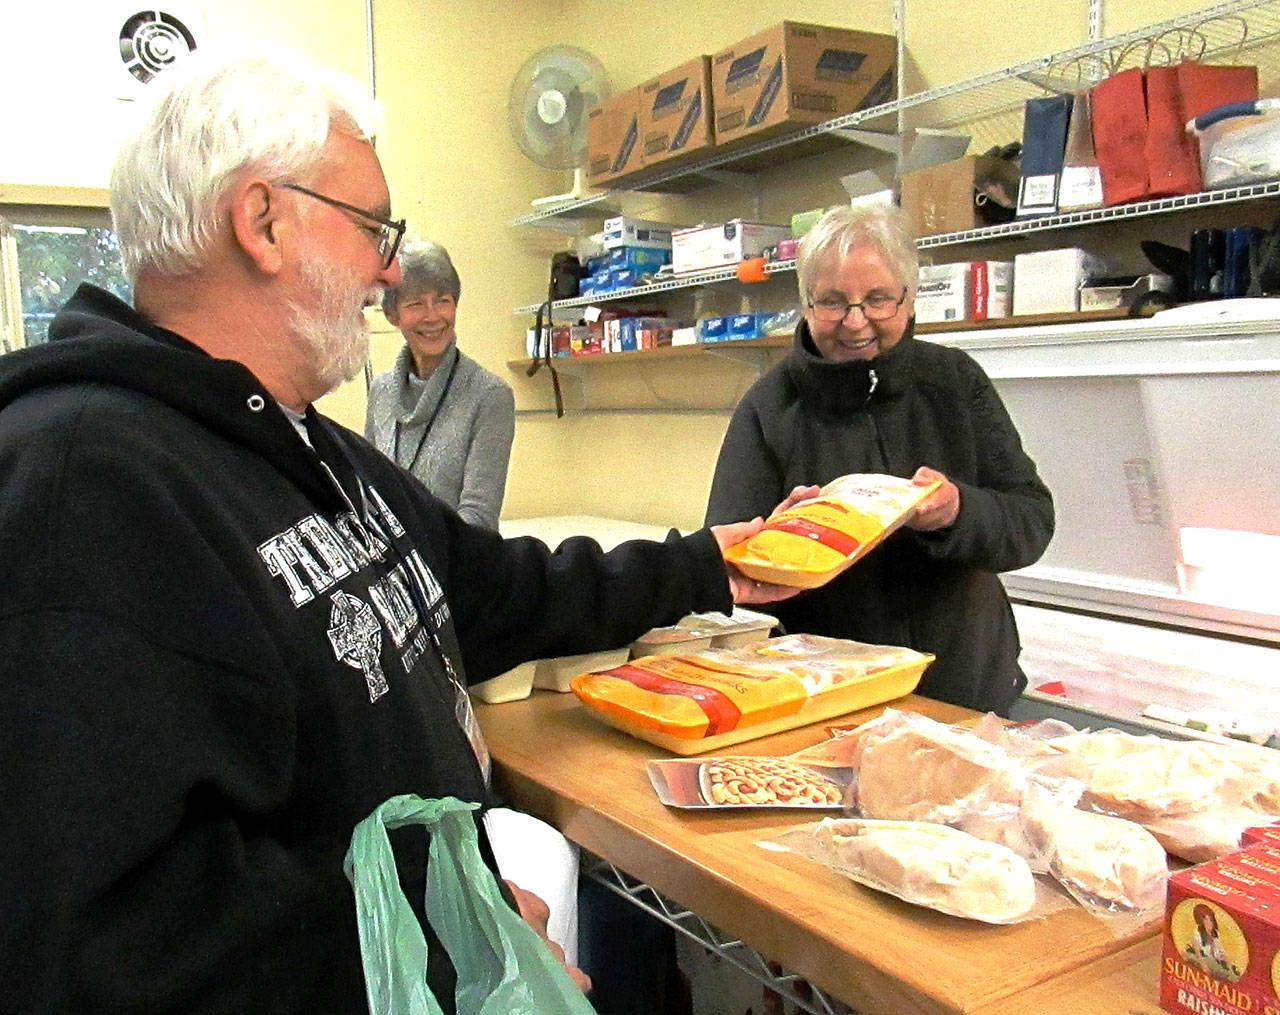 ‘Lifeline” helps provide the gift of food for those in need